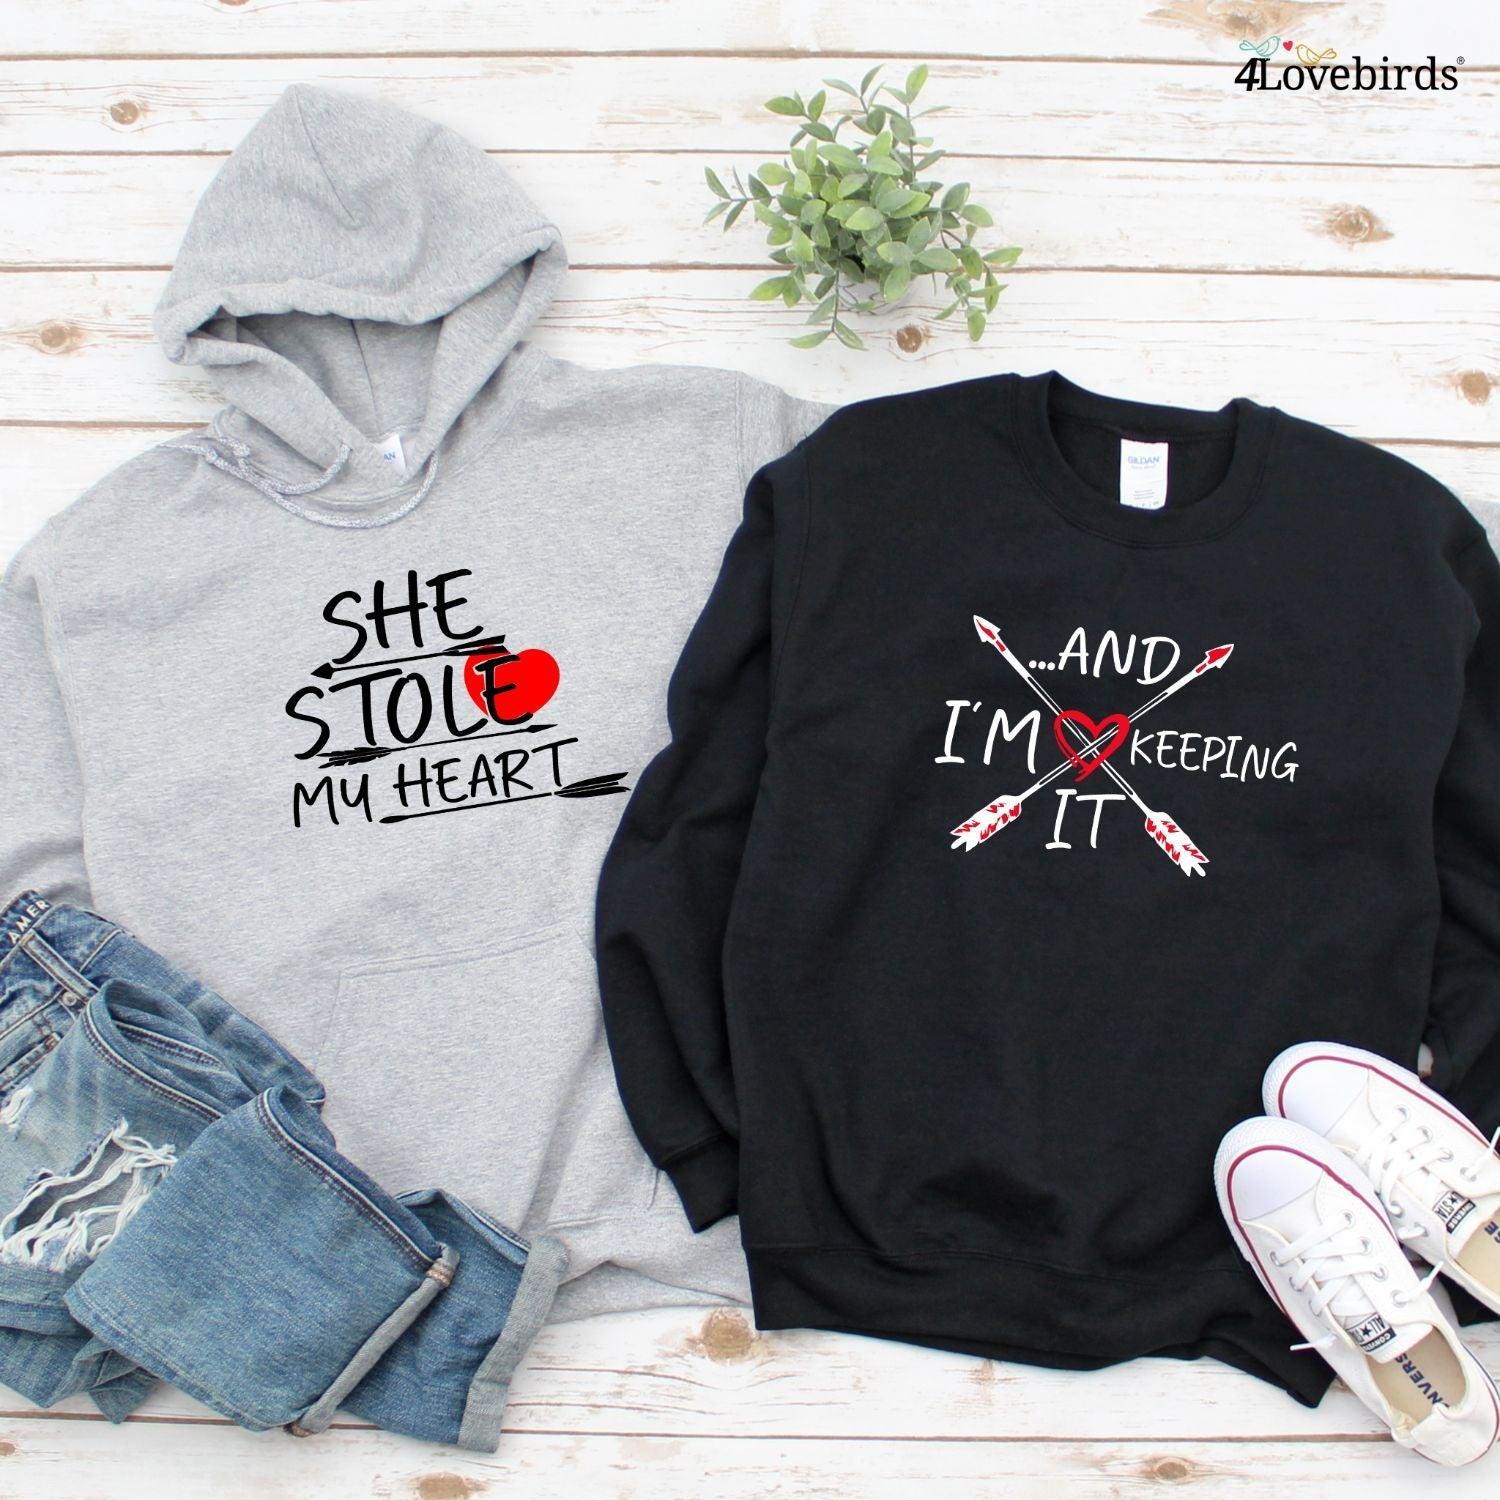 https://4lovebirds.com/cdn/shop/files/matching-couple-valentine-s-day-gifts-funny-outfits-for-boyfriend-and-girlfriend-4lovebirds-2_52650b8f-3a20-443b-be98-be36af26816f.jpg?v=1689388308